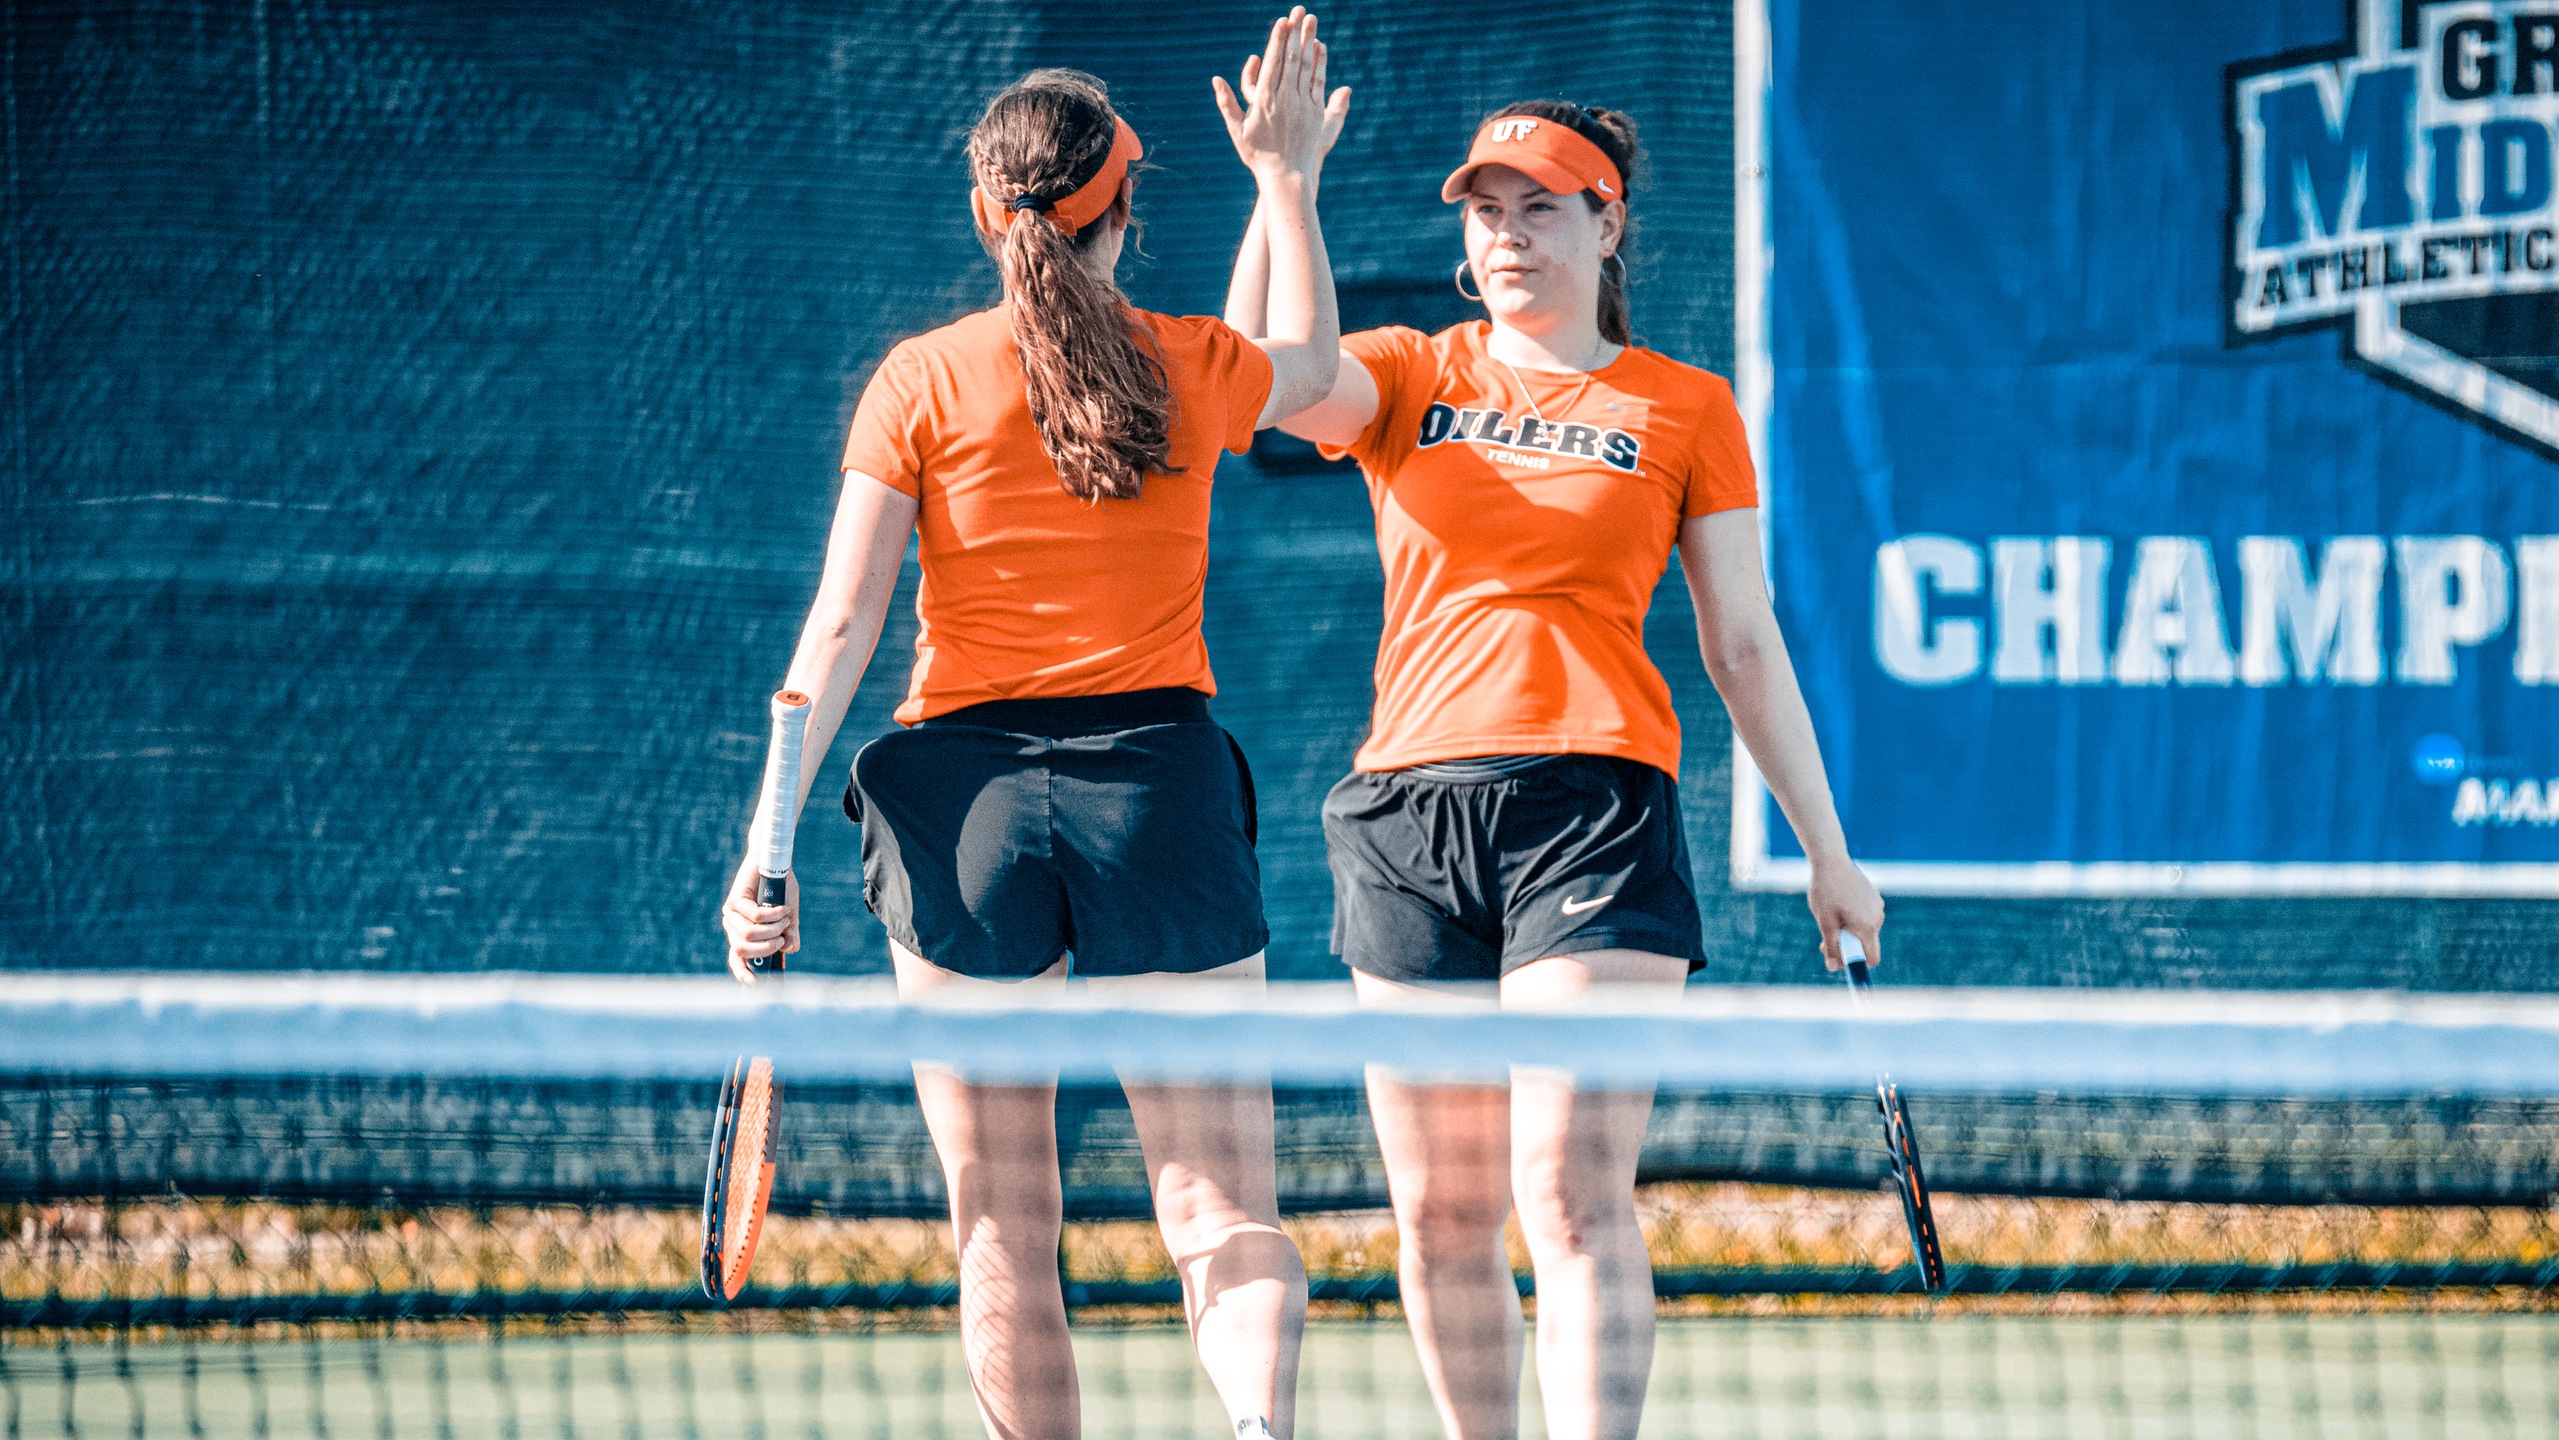 Findlay Defeats D1 Army in Exhibition Match